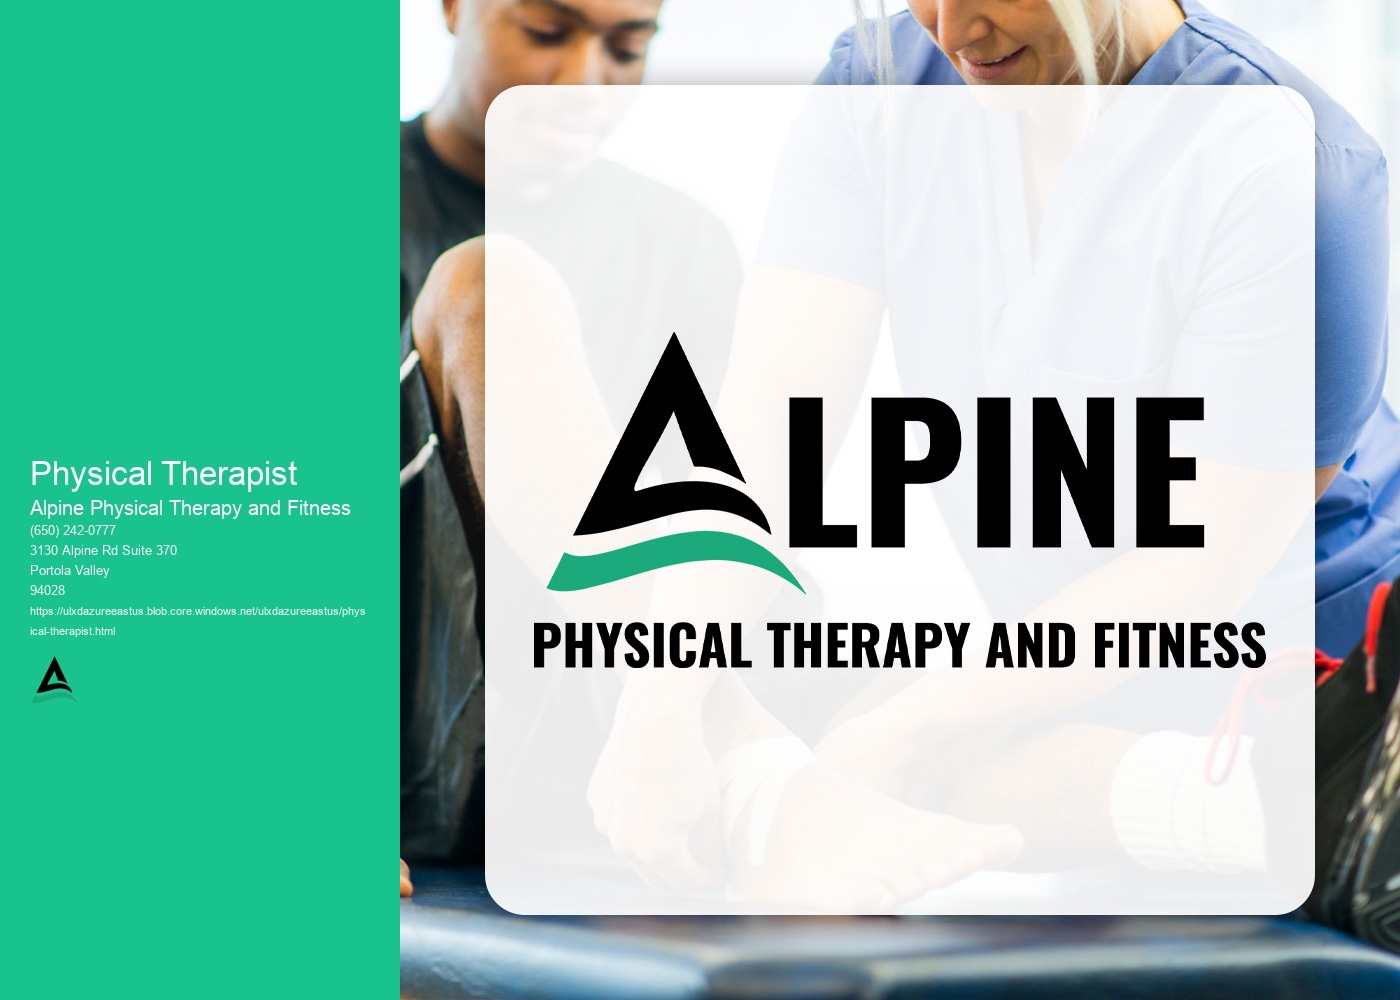 What are the benefits of manual therapy in treating musculoskeletal injuries and conditions?